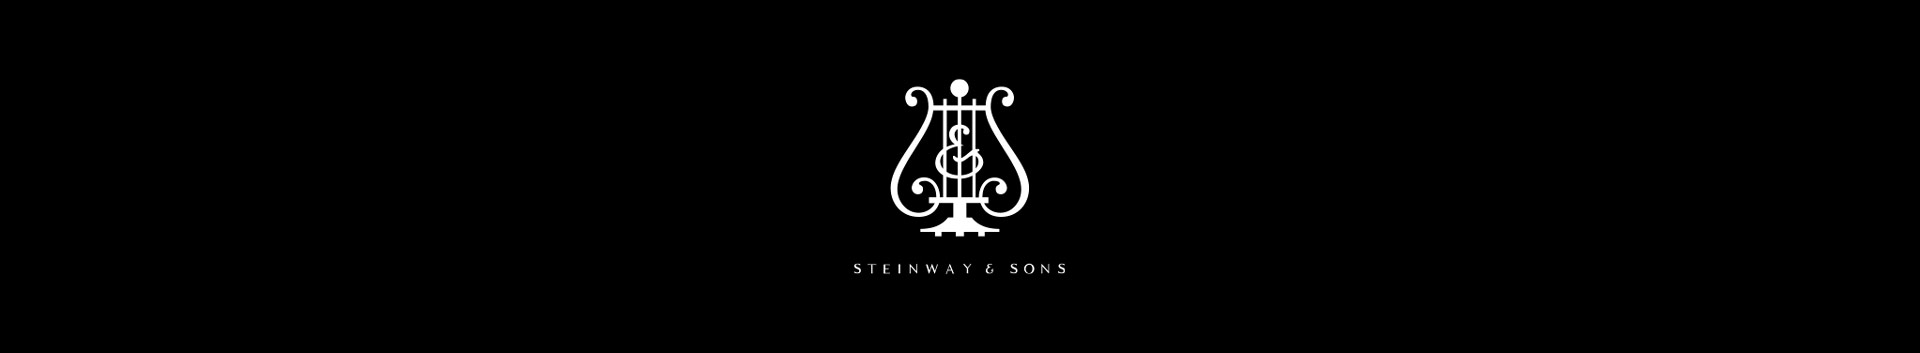 Steinway & Sons logo in white on top of a all-black background.